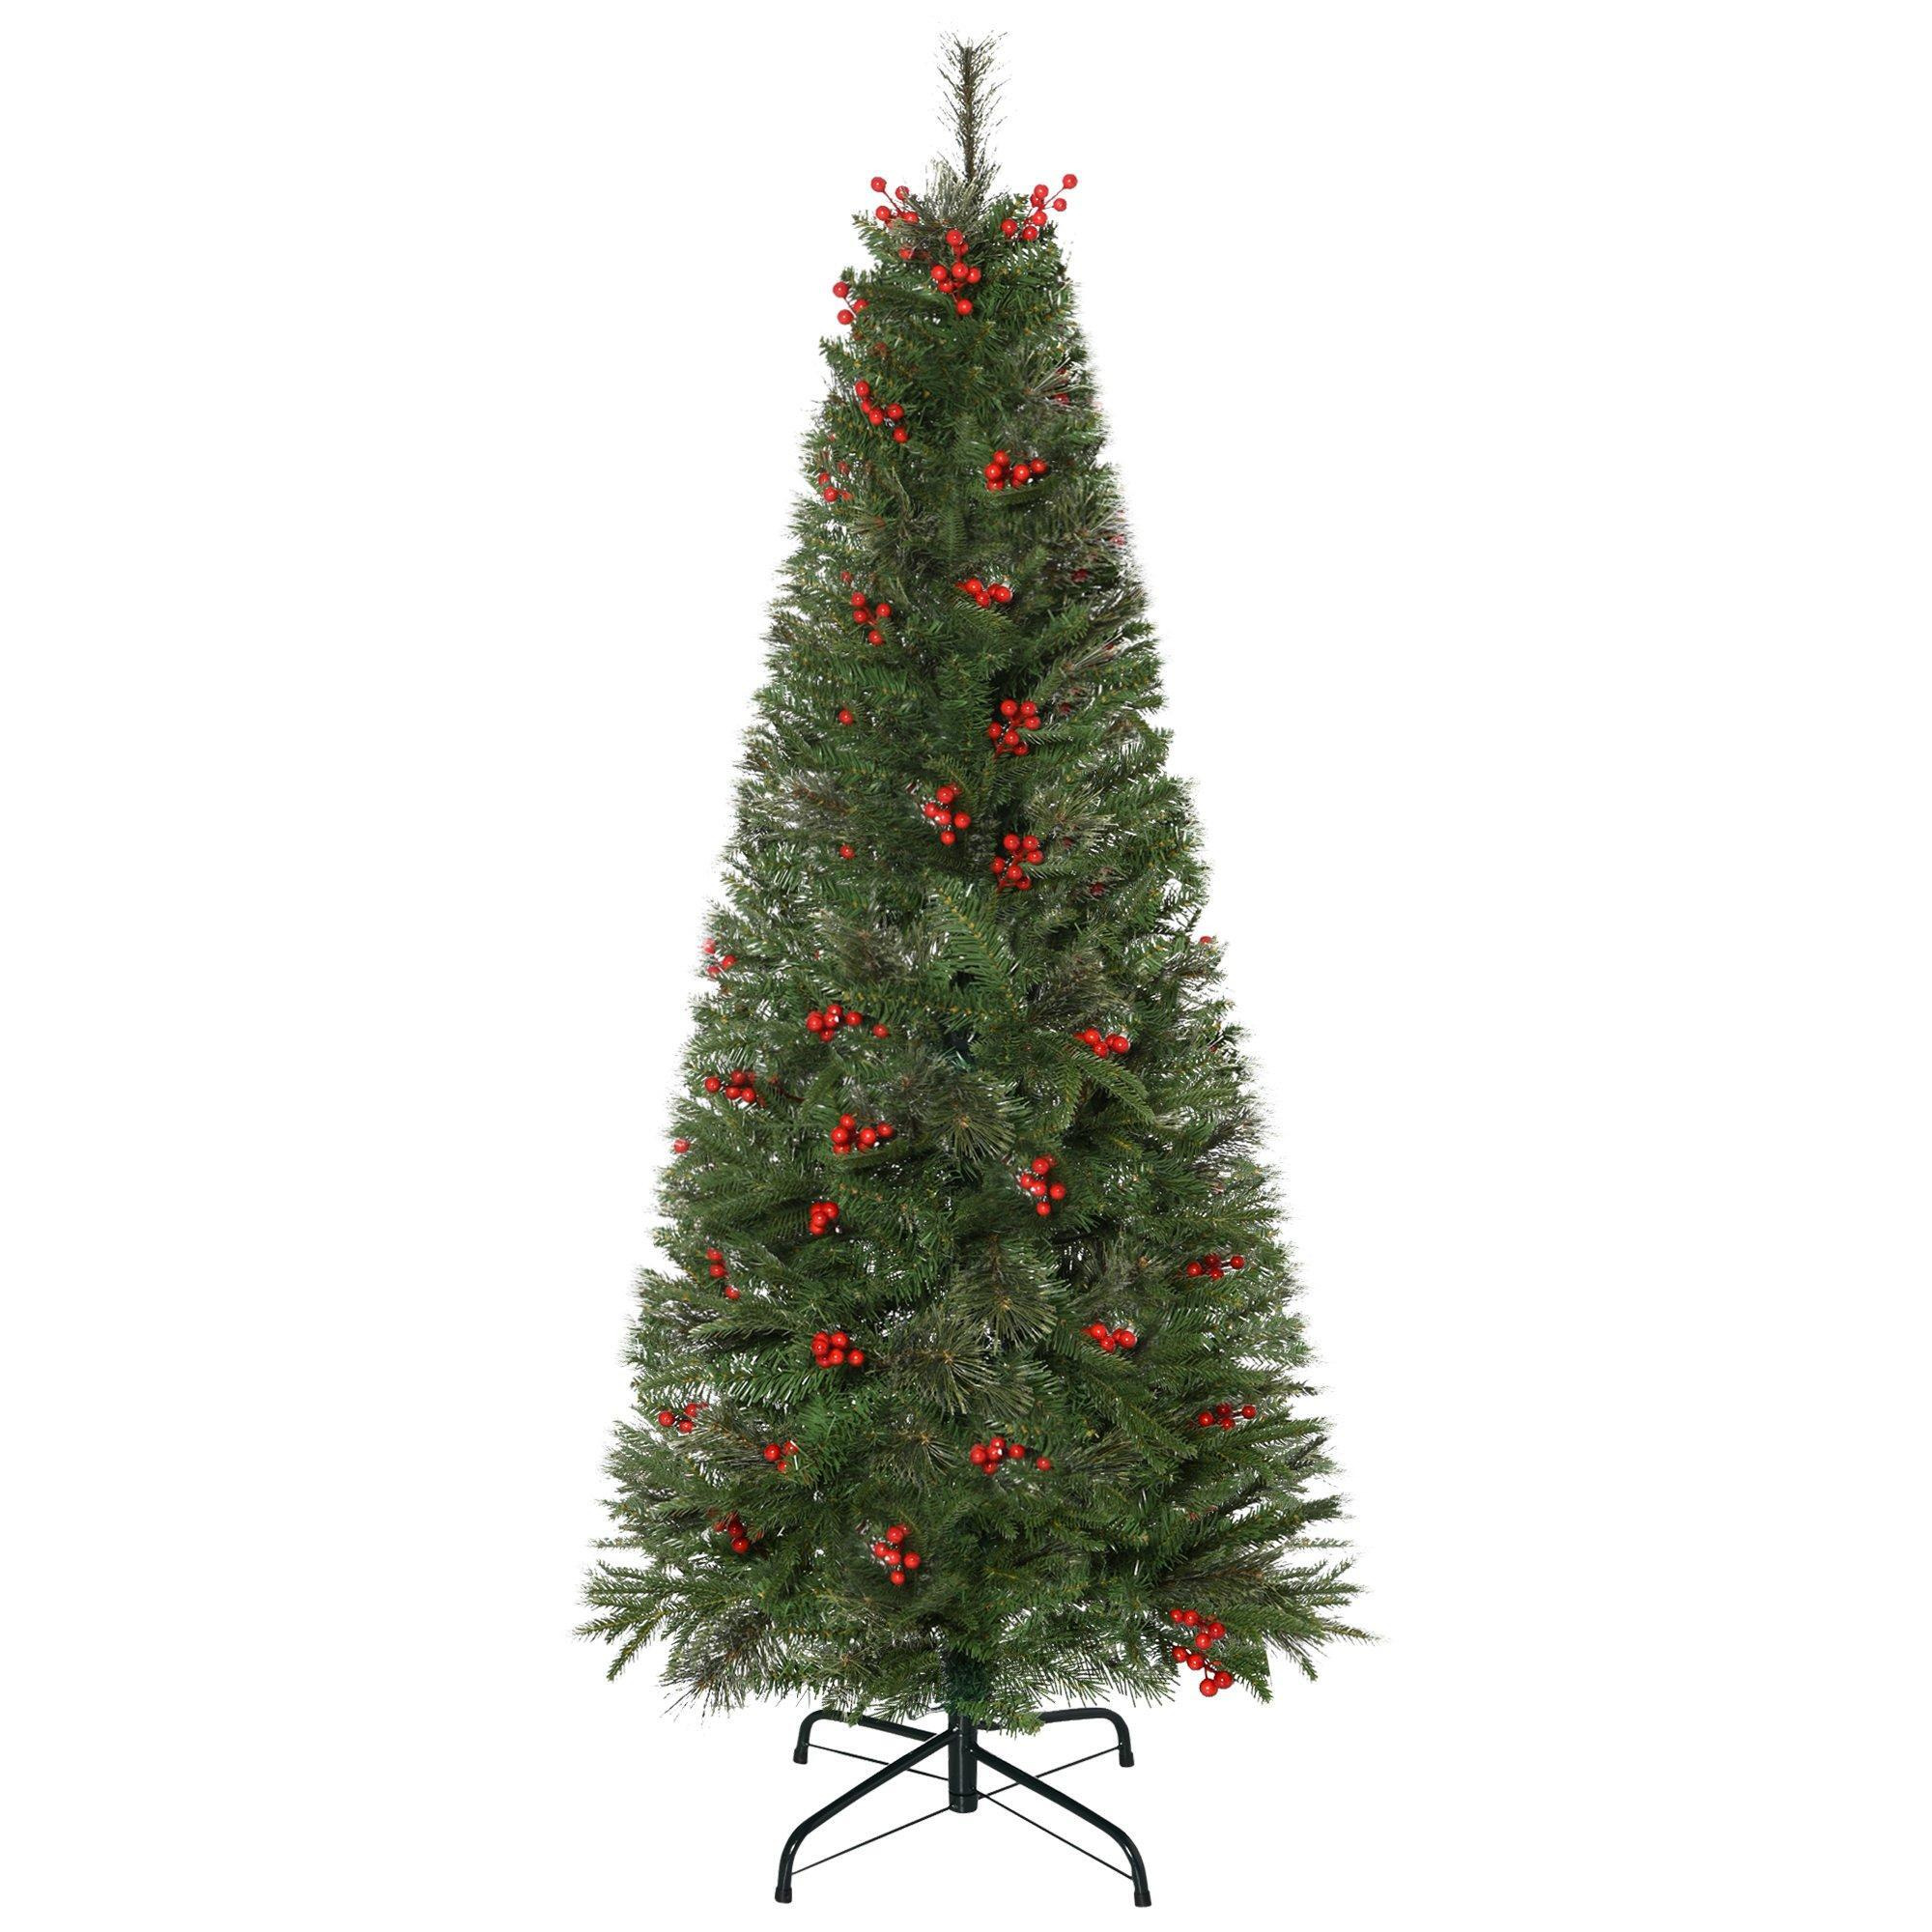 5' Artificial Christmas Tree Decoration Branch Tips Red Berry - image 1